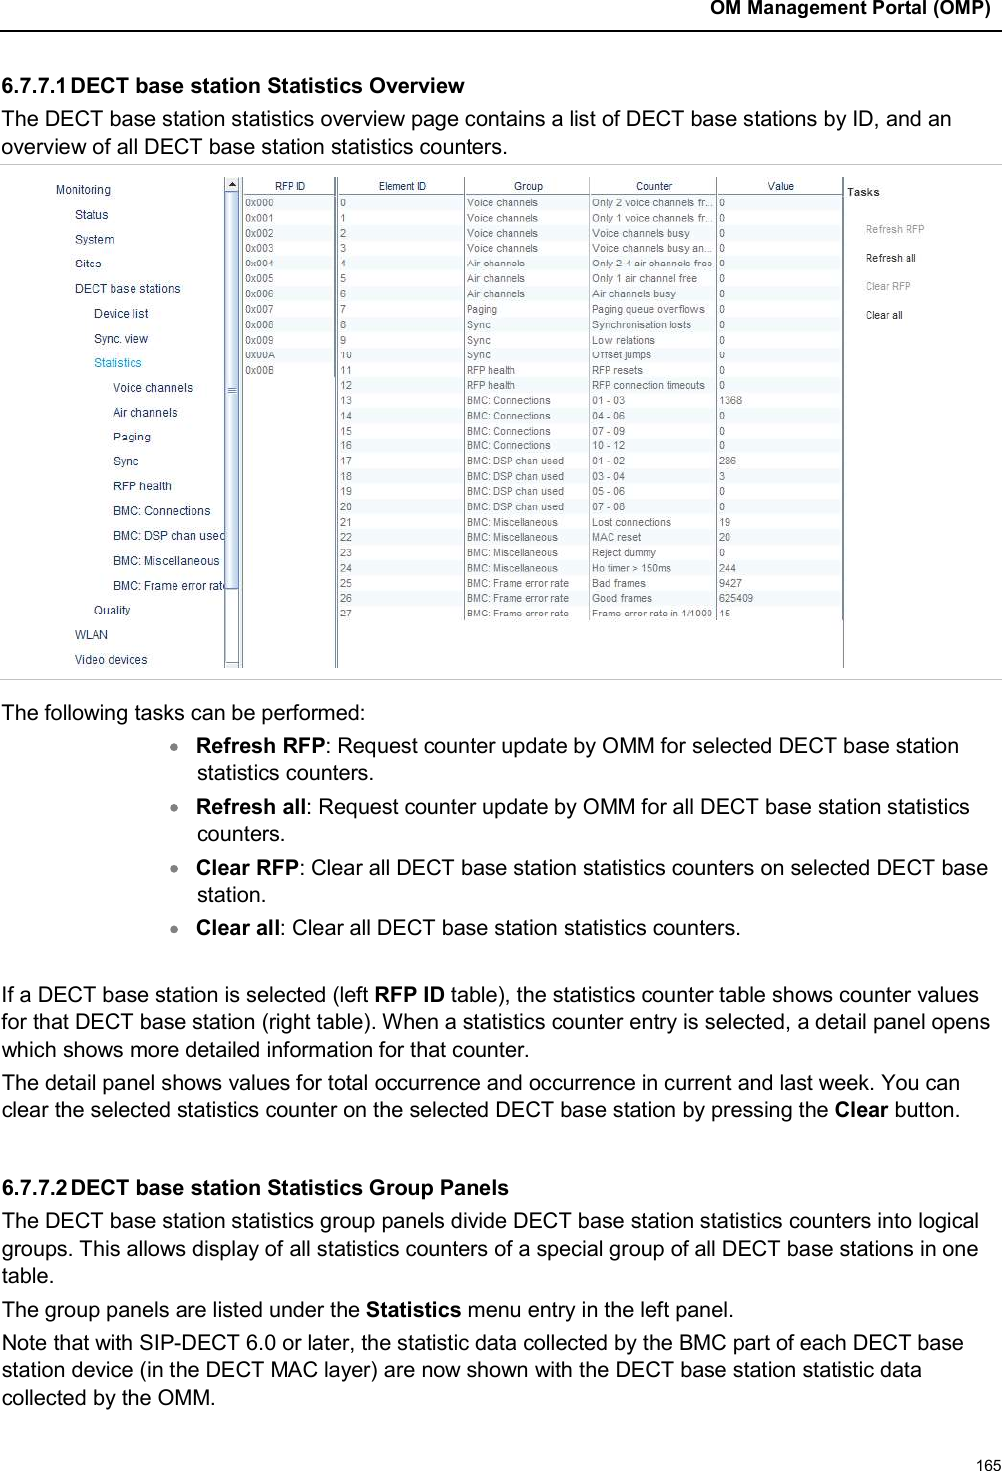 OM Management Portal (OMP)1656.7.7.1DECT base station Statistics OverviewThe DECT base station statistics overview page contains a list of DECT base stations by ID, and an overview of all DECT base station statistics counters. The following tasks can be performed:Refresh RFP: Request counter update by OMM for selected DECT base stationstatistics counters.Refresh all: Request counter update by OMM for all DECT base station statistics counters.Clear RFP: Clear all DECT base station statistics counters on selected DECT base station.Clear all: Clear all DECT base station statistics counters.If a DECT base station is selected (left RFP ID table), the statistics counter table shows counter values for that DECT base station (right table). When a statistics counter entry is selected, a detail panel opens which shows more detailed information for that counter.The detail panel shows values for total occurrence and occurrence in current and last week. You can clear the selected statistics counter on the selected DECT base station by pressing the Clear button.6.7.7.2DECT base station Statistics Group PanelsThe DECT base station statistics group panels divide DECT base station statistics counters into logical groups. This allows display of all statistics counters of a special group of all DECT base stations in one table.The group panels are listed under the Statistics menu entry in the left panel.Note that with SIP-DECT 6.0 or later, the statistic data collected by the BMC part of each DECT base station device (in the DECT MAC layer) are now shown with the DECT base station statistic data collected by the OMM.